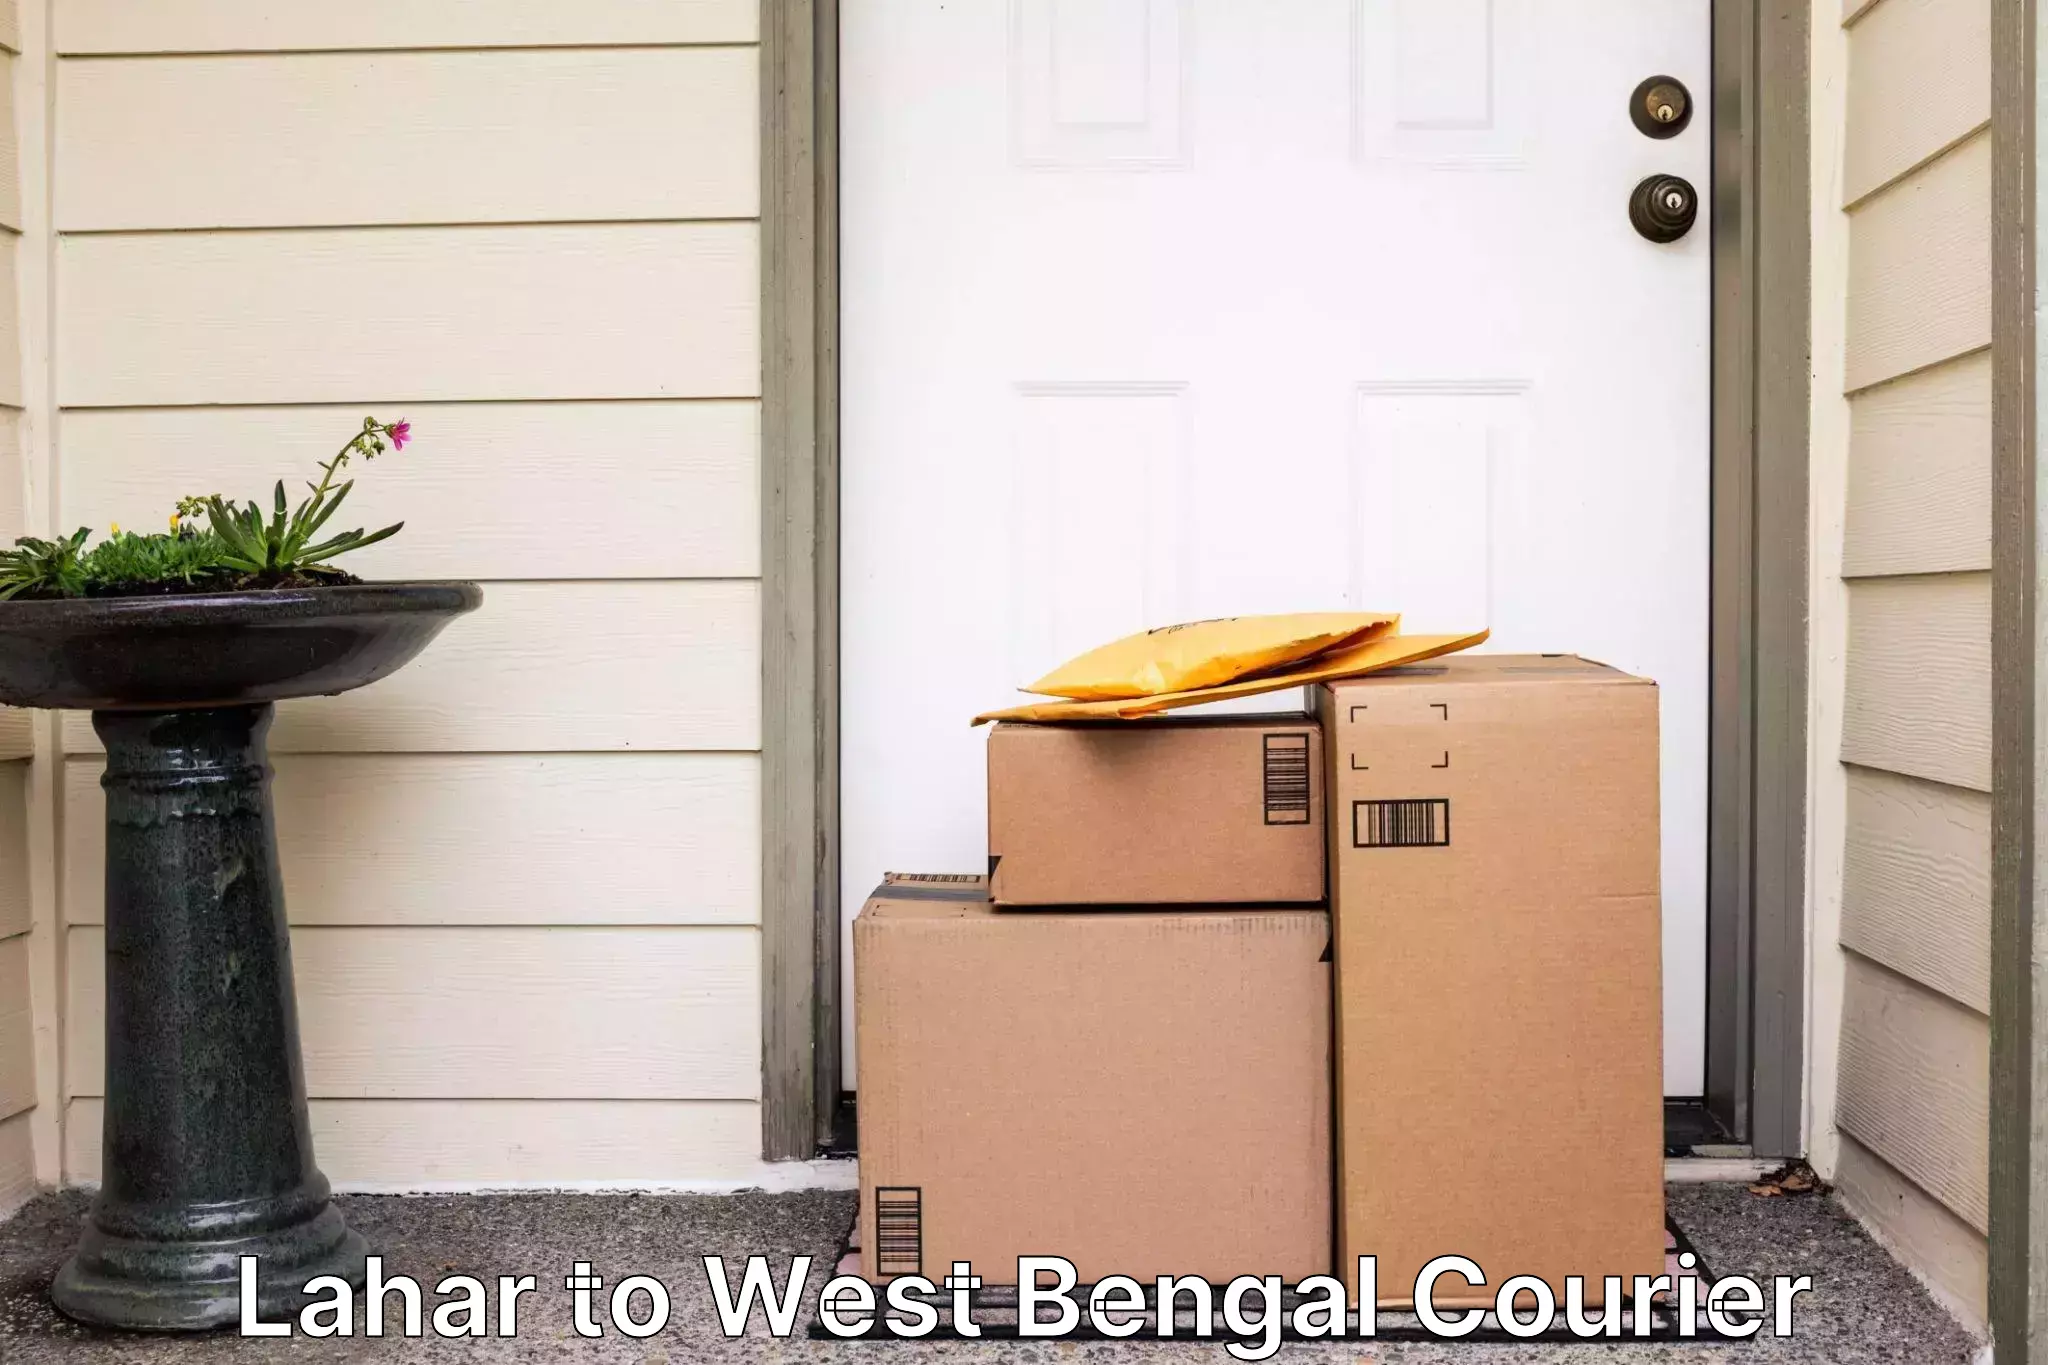 Speedy delivery service in Lahar to West Bengal